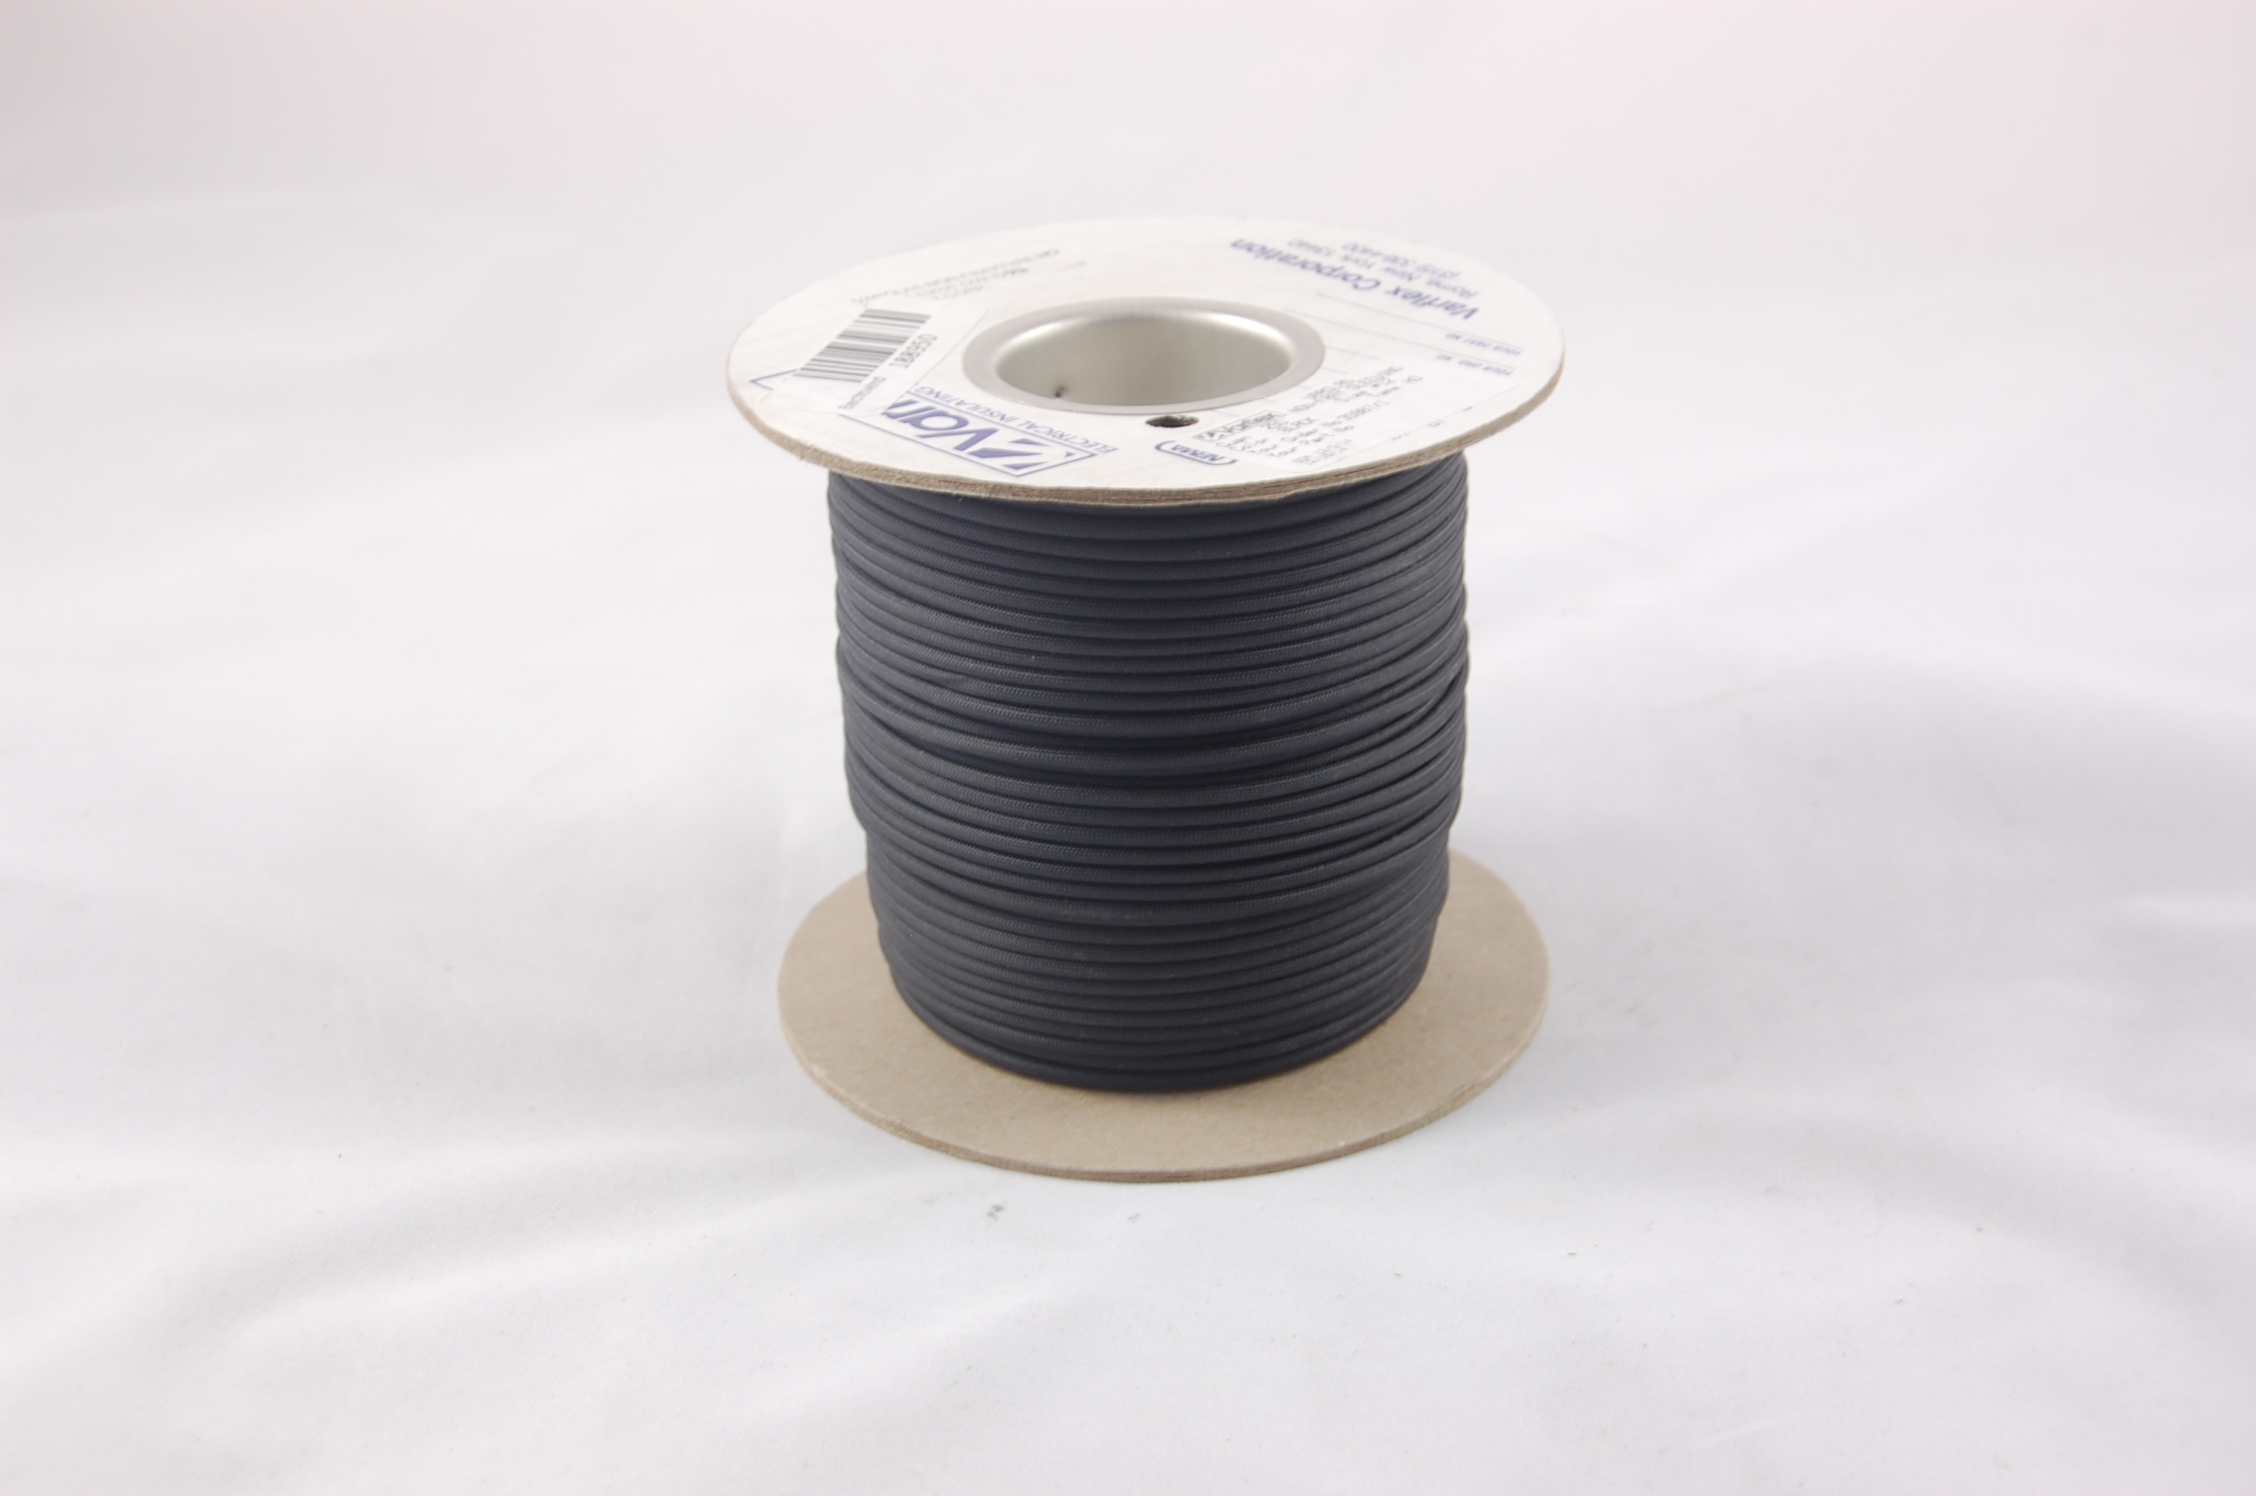 #24 AWG Varglas Type HO Heat-Cleaned and Treated High Temperature Non-Fray Flexible Fiberglass Sleeving , black, 500 FT per spool